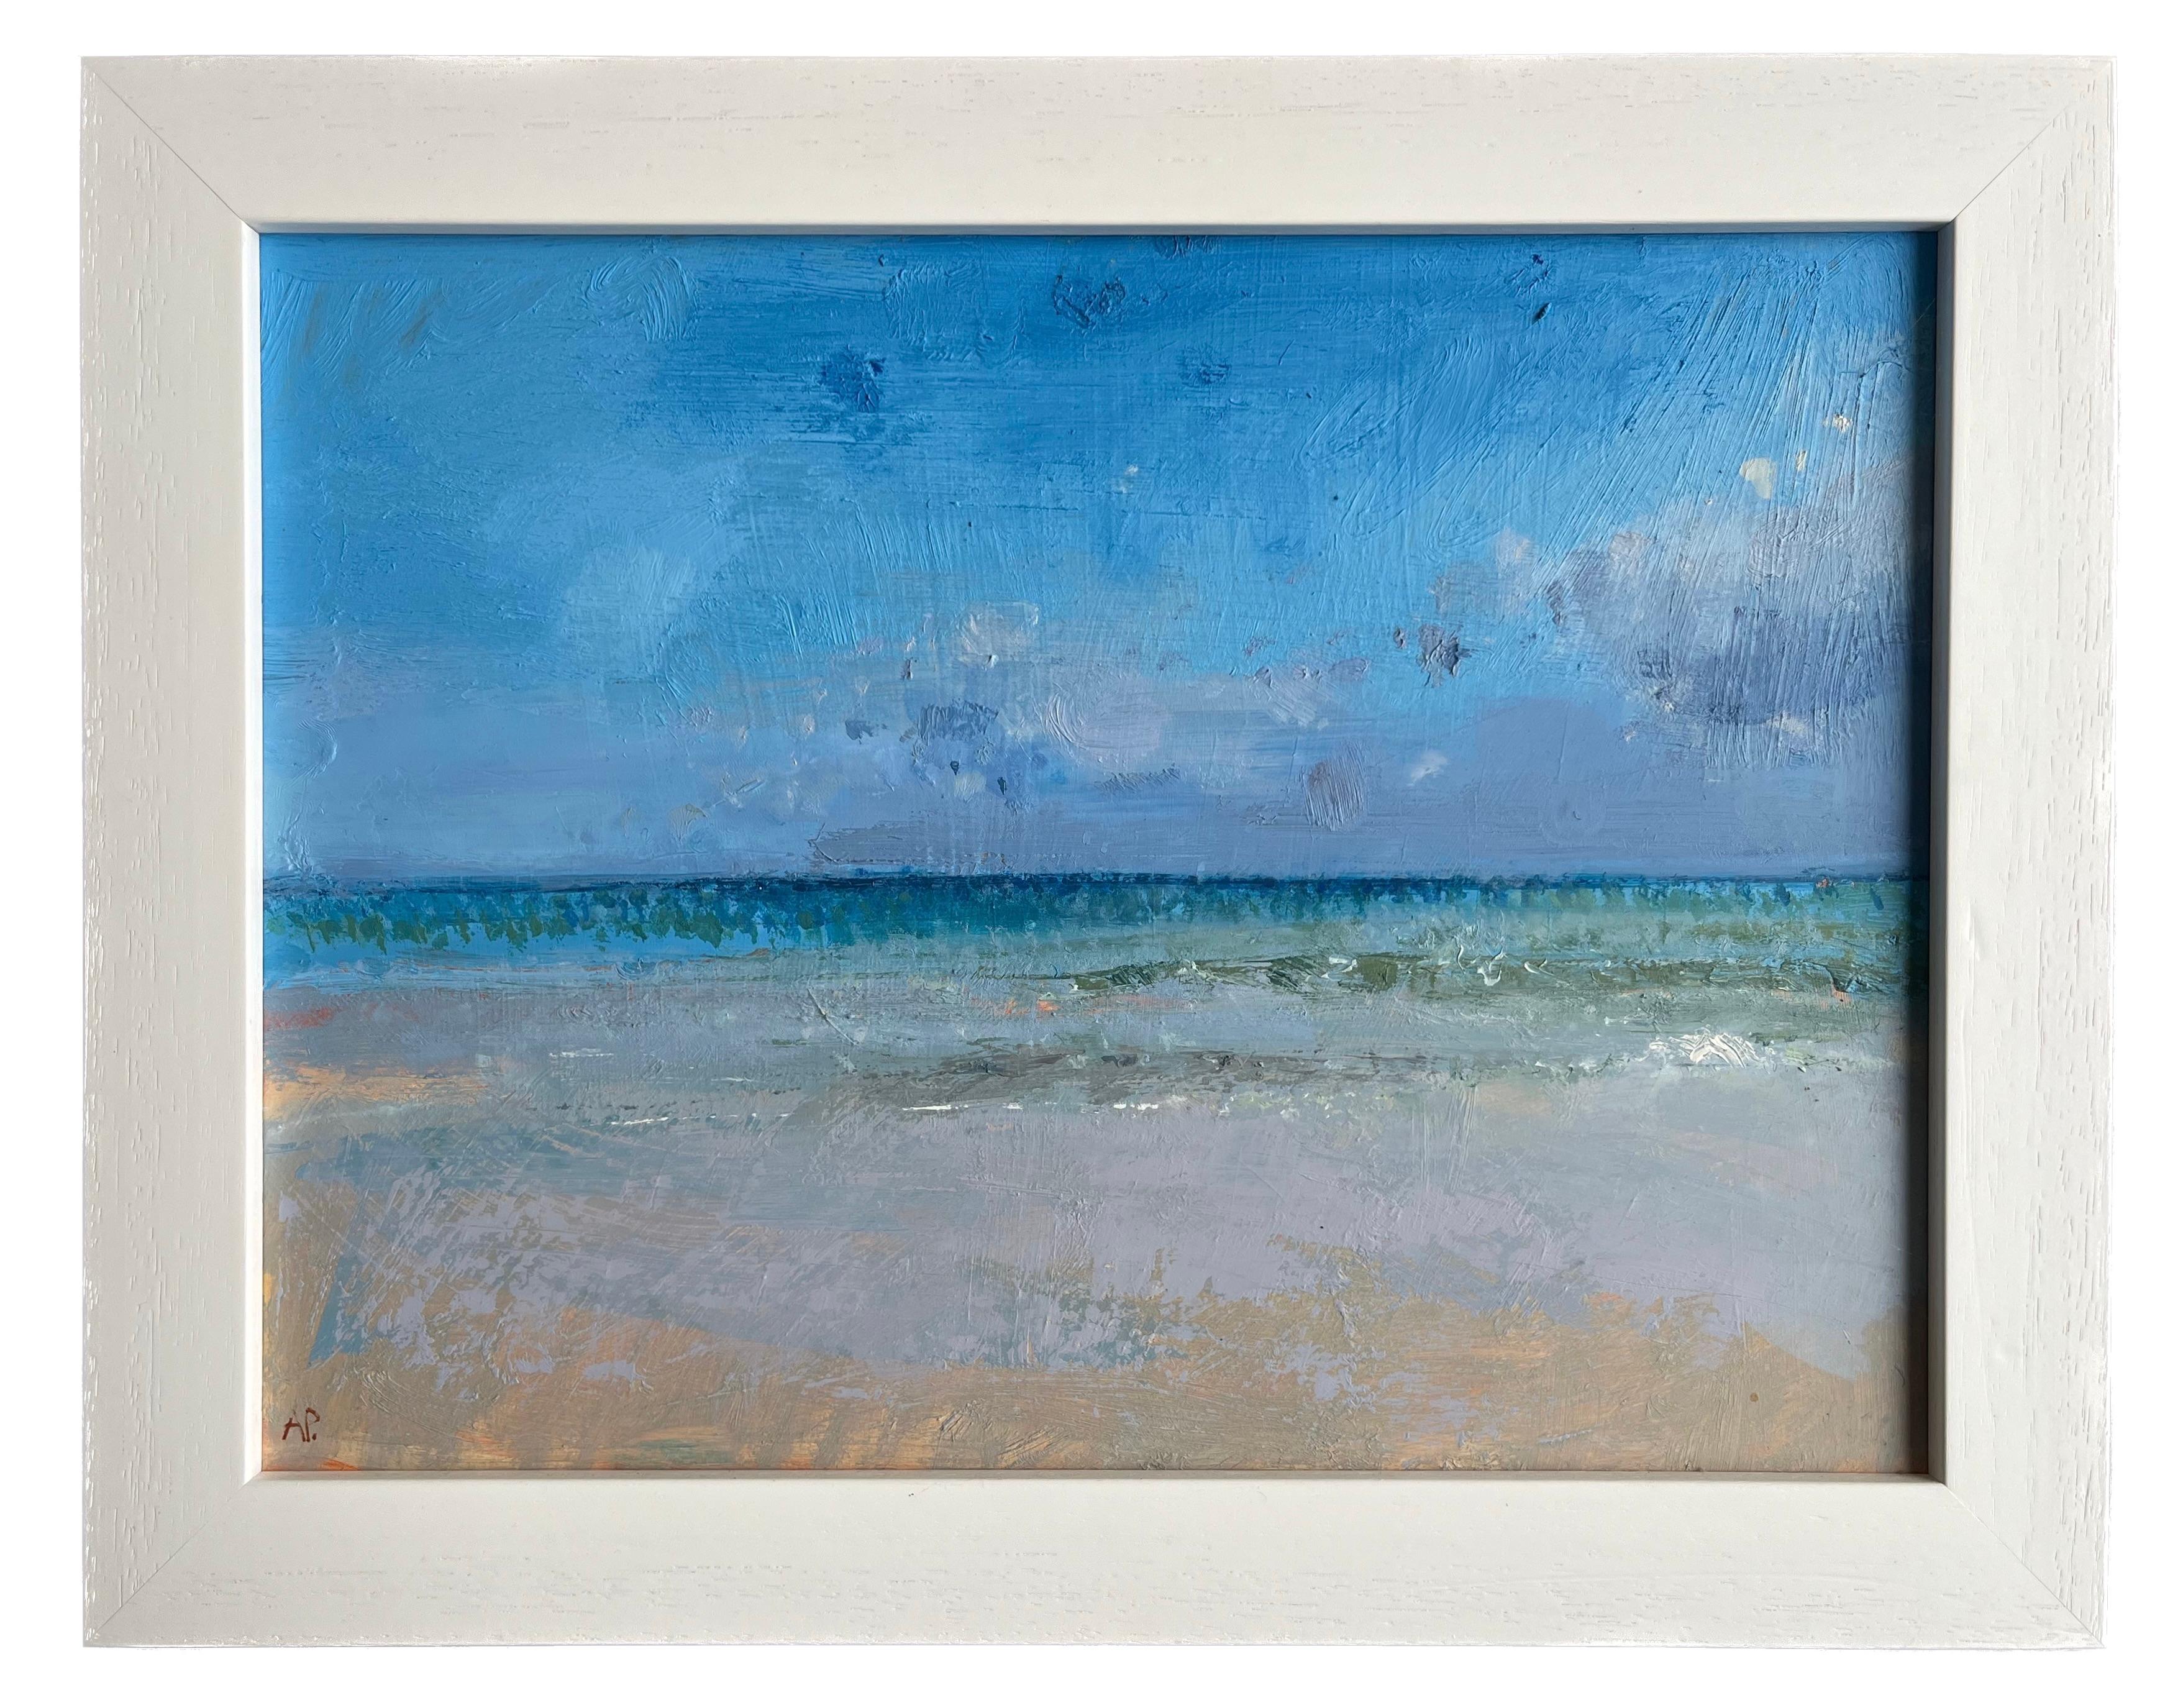 A really striking image of birds in flight at the edge of the sea, capturing the spectrum of wonderful blues in the sea and sky.

Adrian Parnell (b.1952)
Seize the day
Signed with initials
Inscribed with title and date verso
Oil on board
12 x 16